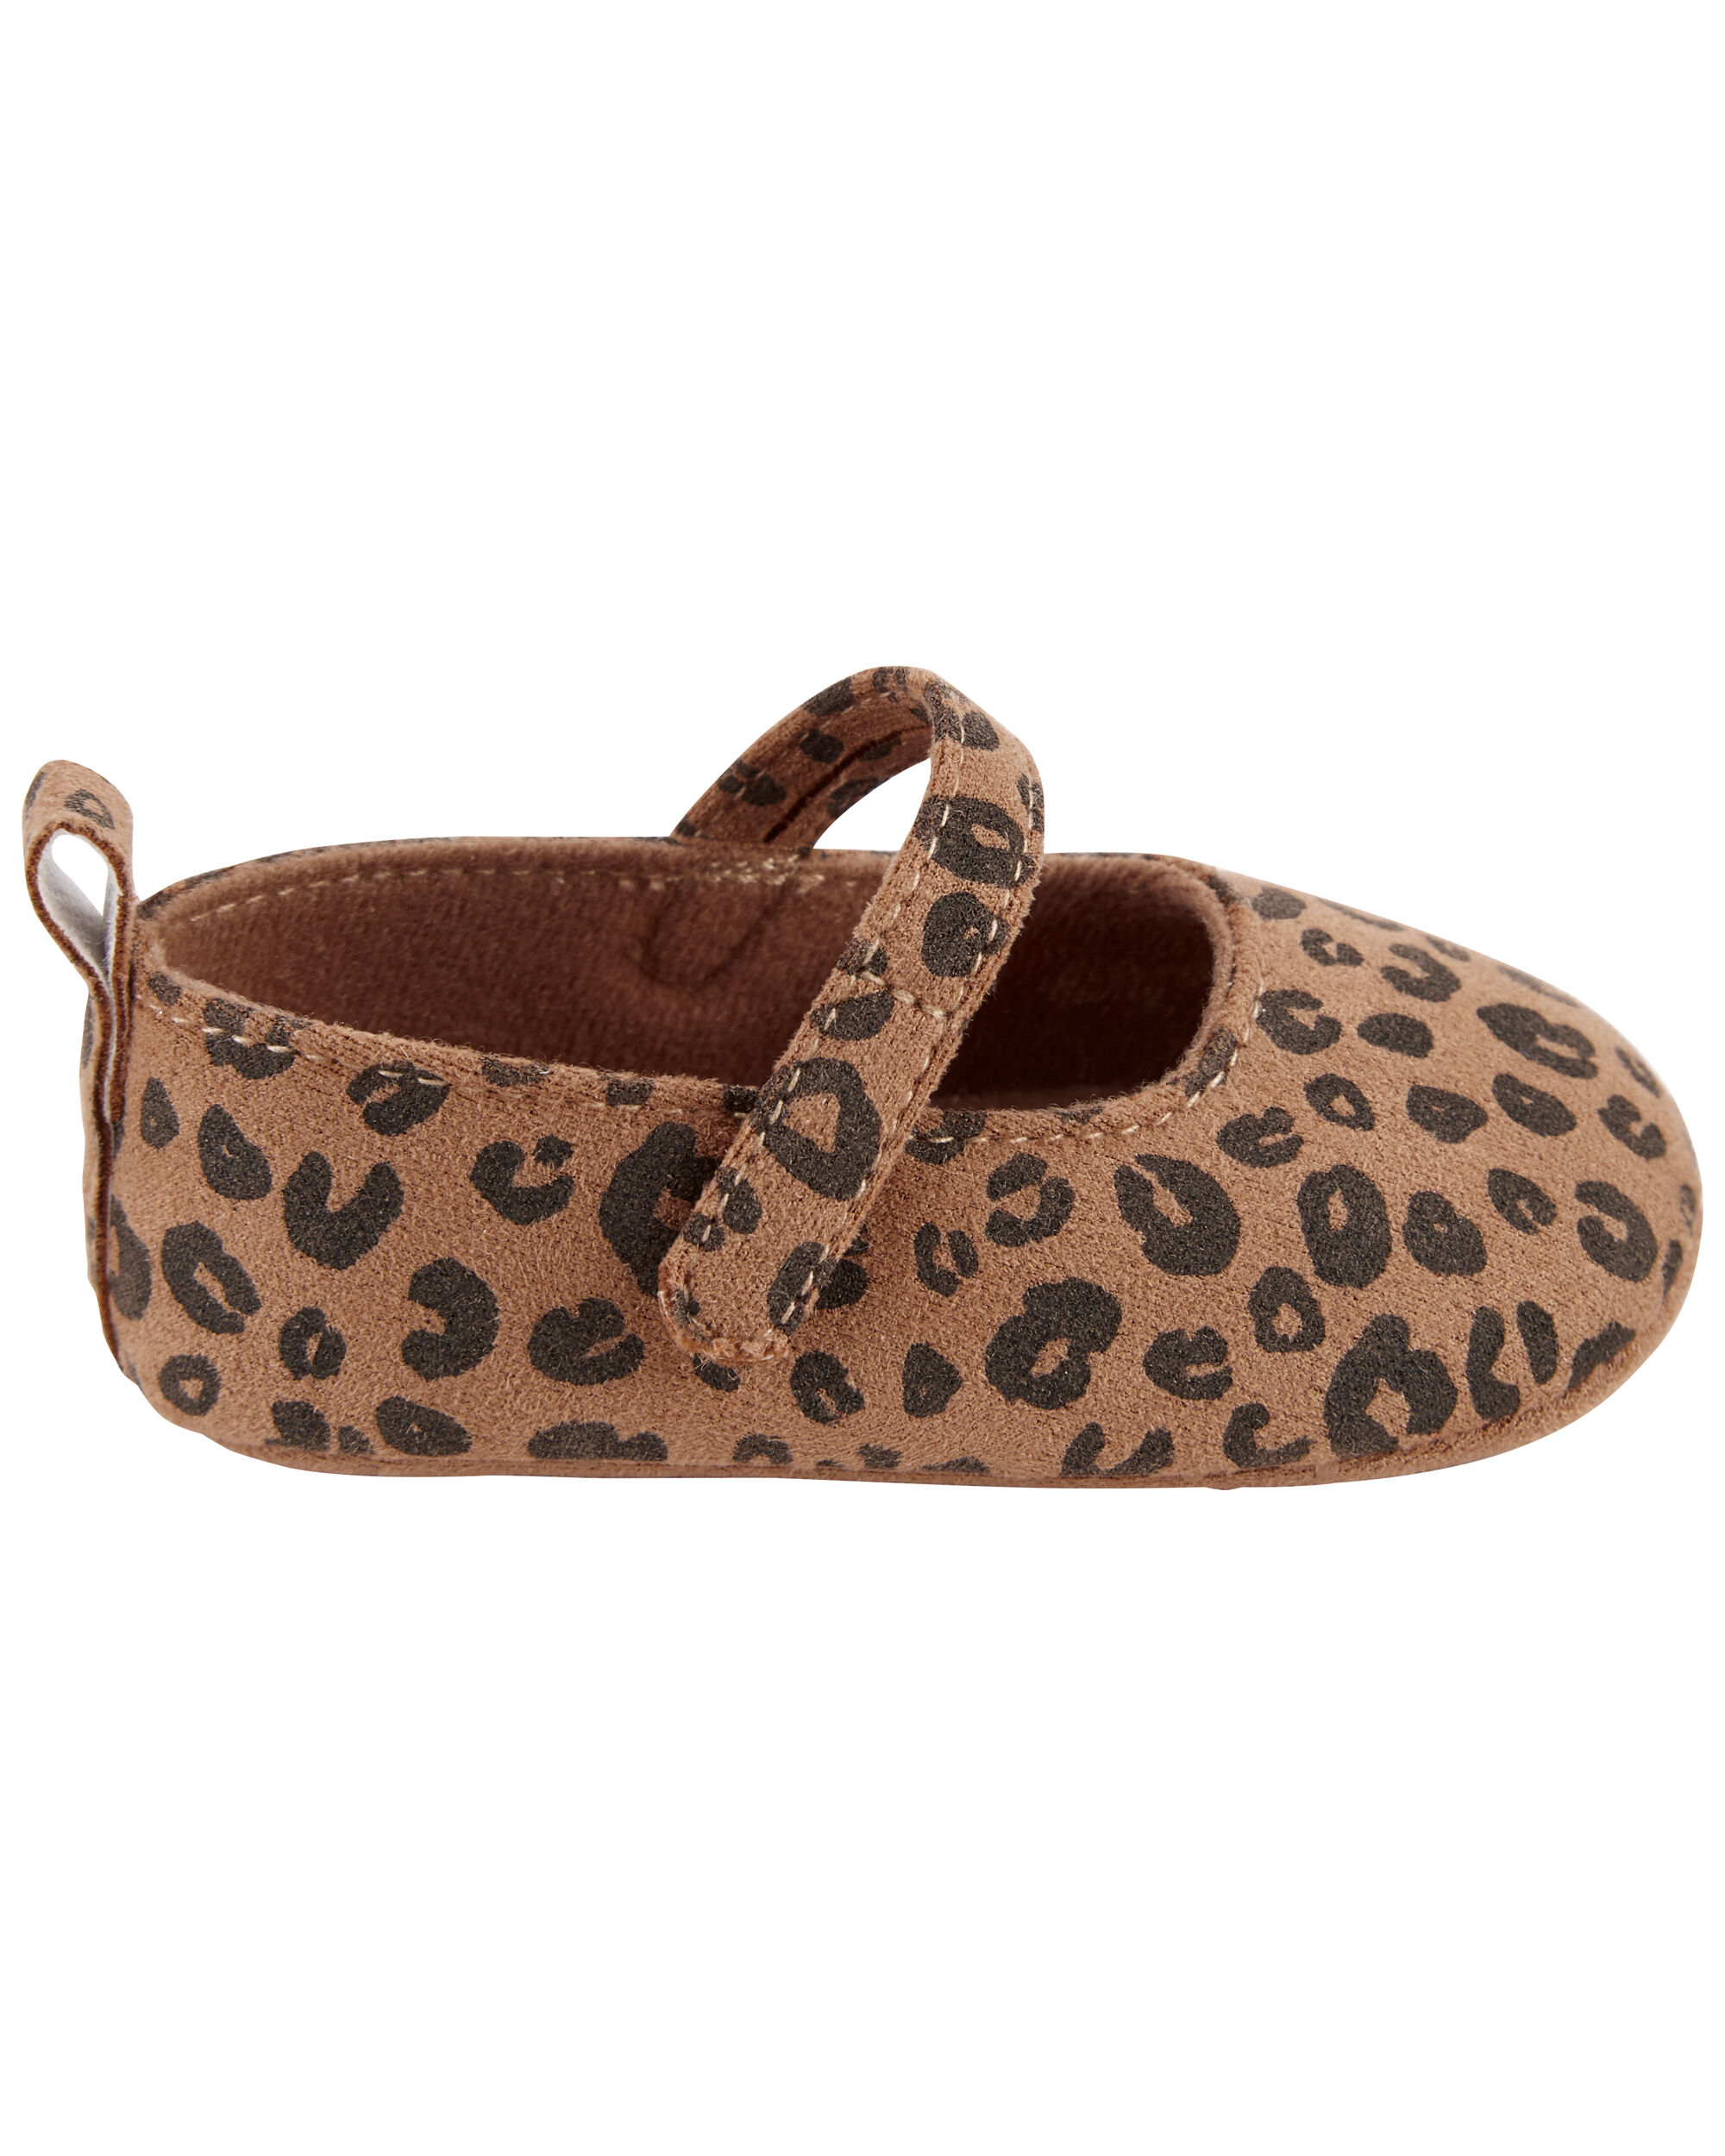 Baby Leopard Mary Jane Shoes